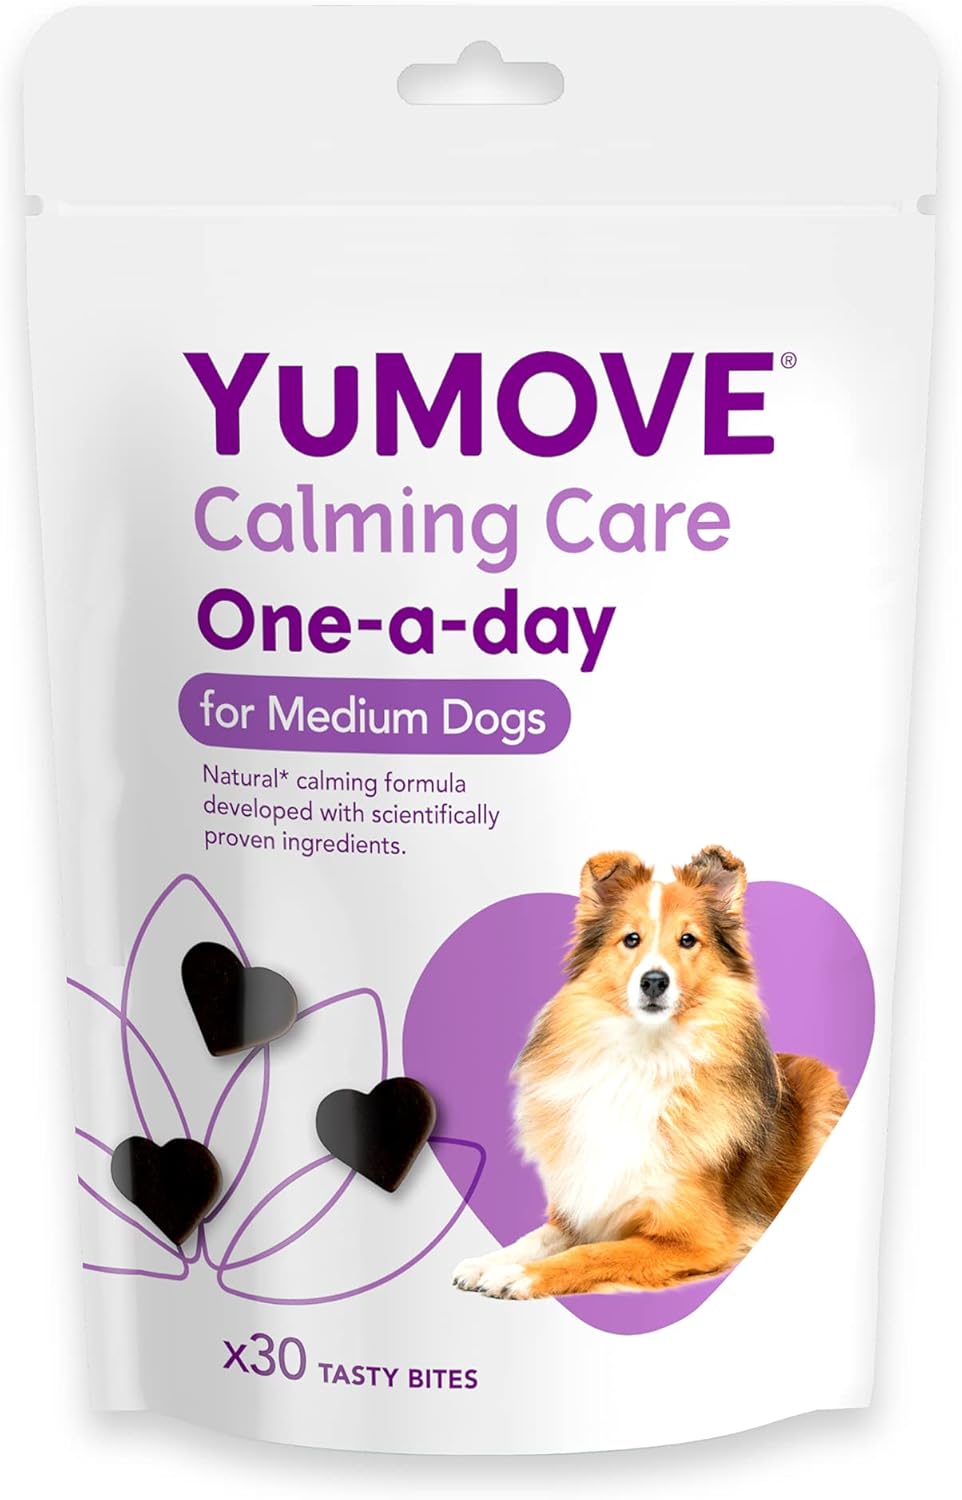 YuMOVE Calming Care One-a-day for Medium Dogs | Previously YuCALM One-A-Day | Calming Supplemnent for Dogs who are Stressed or Nervous |30 Chews - 1 Month Supply | Packaging may vary?YCCM30